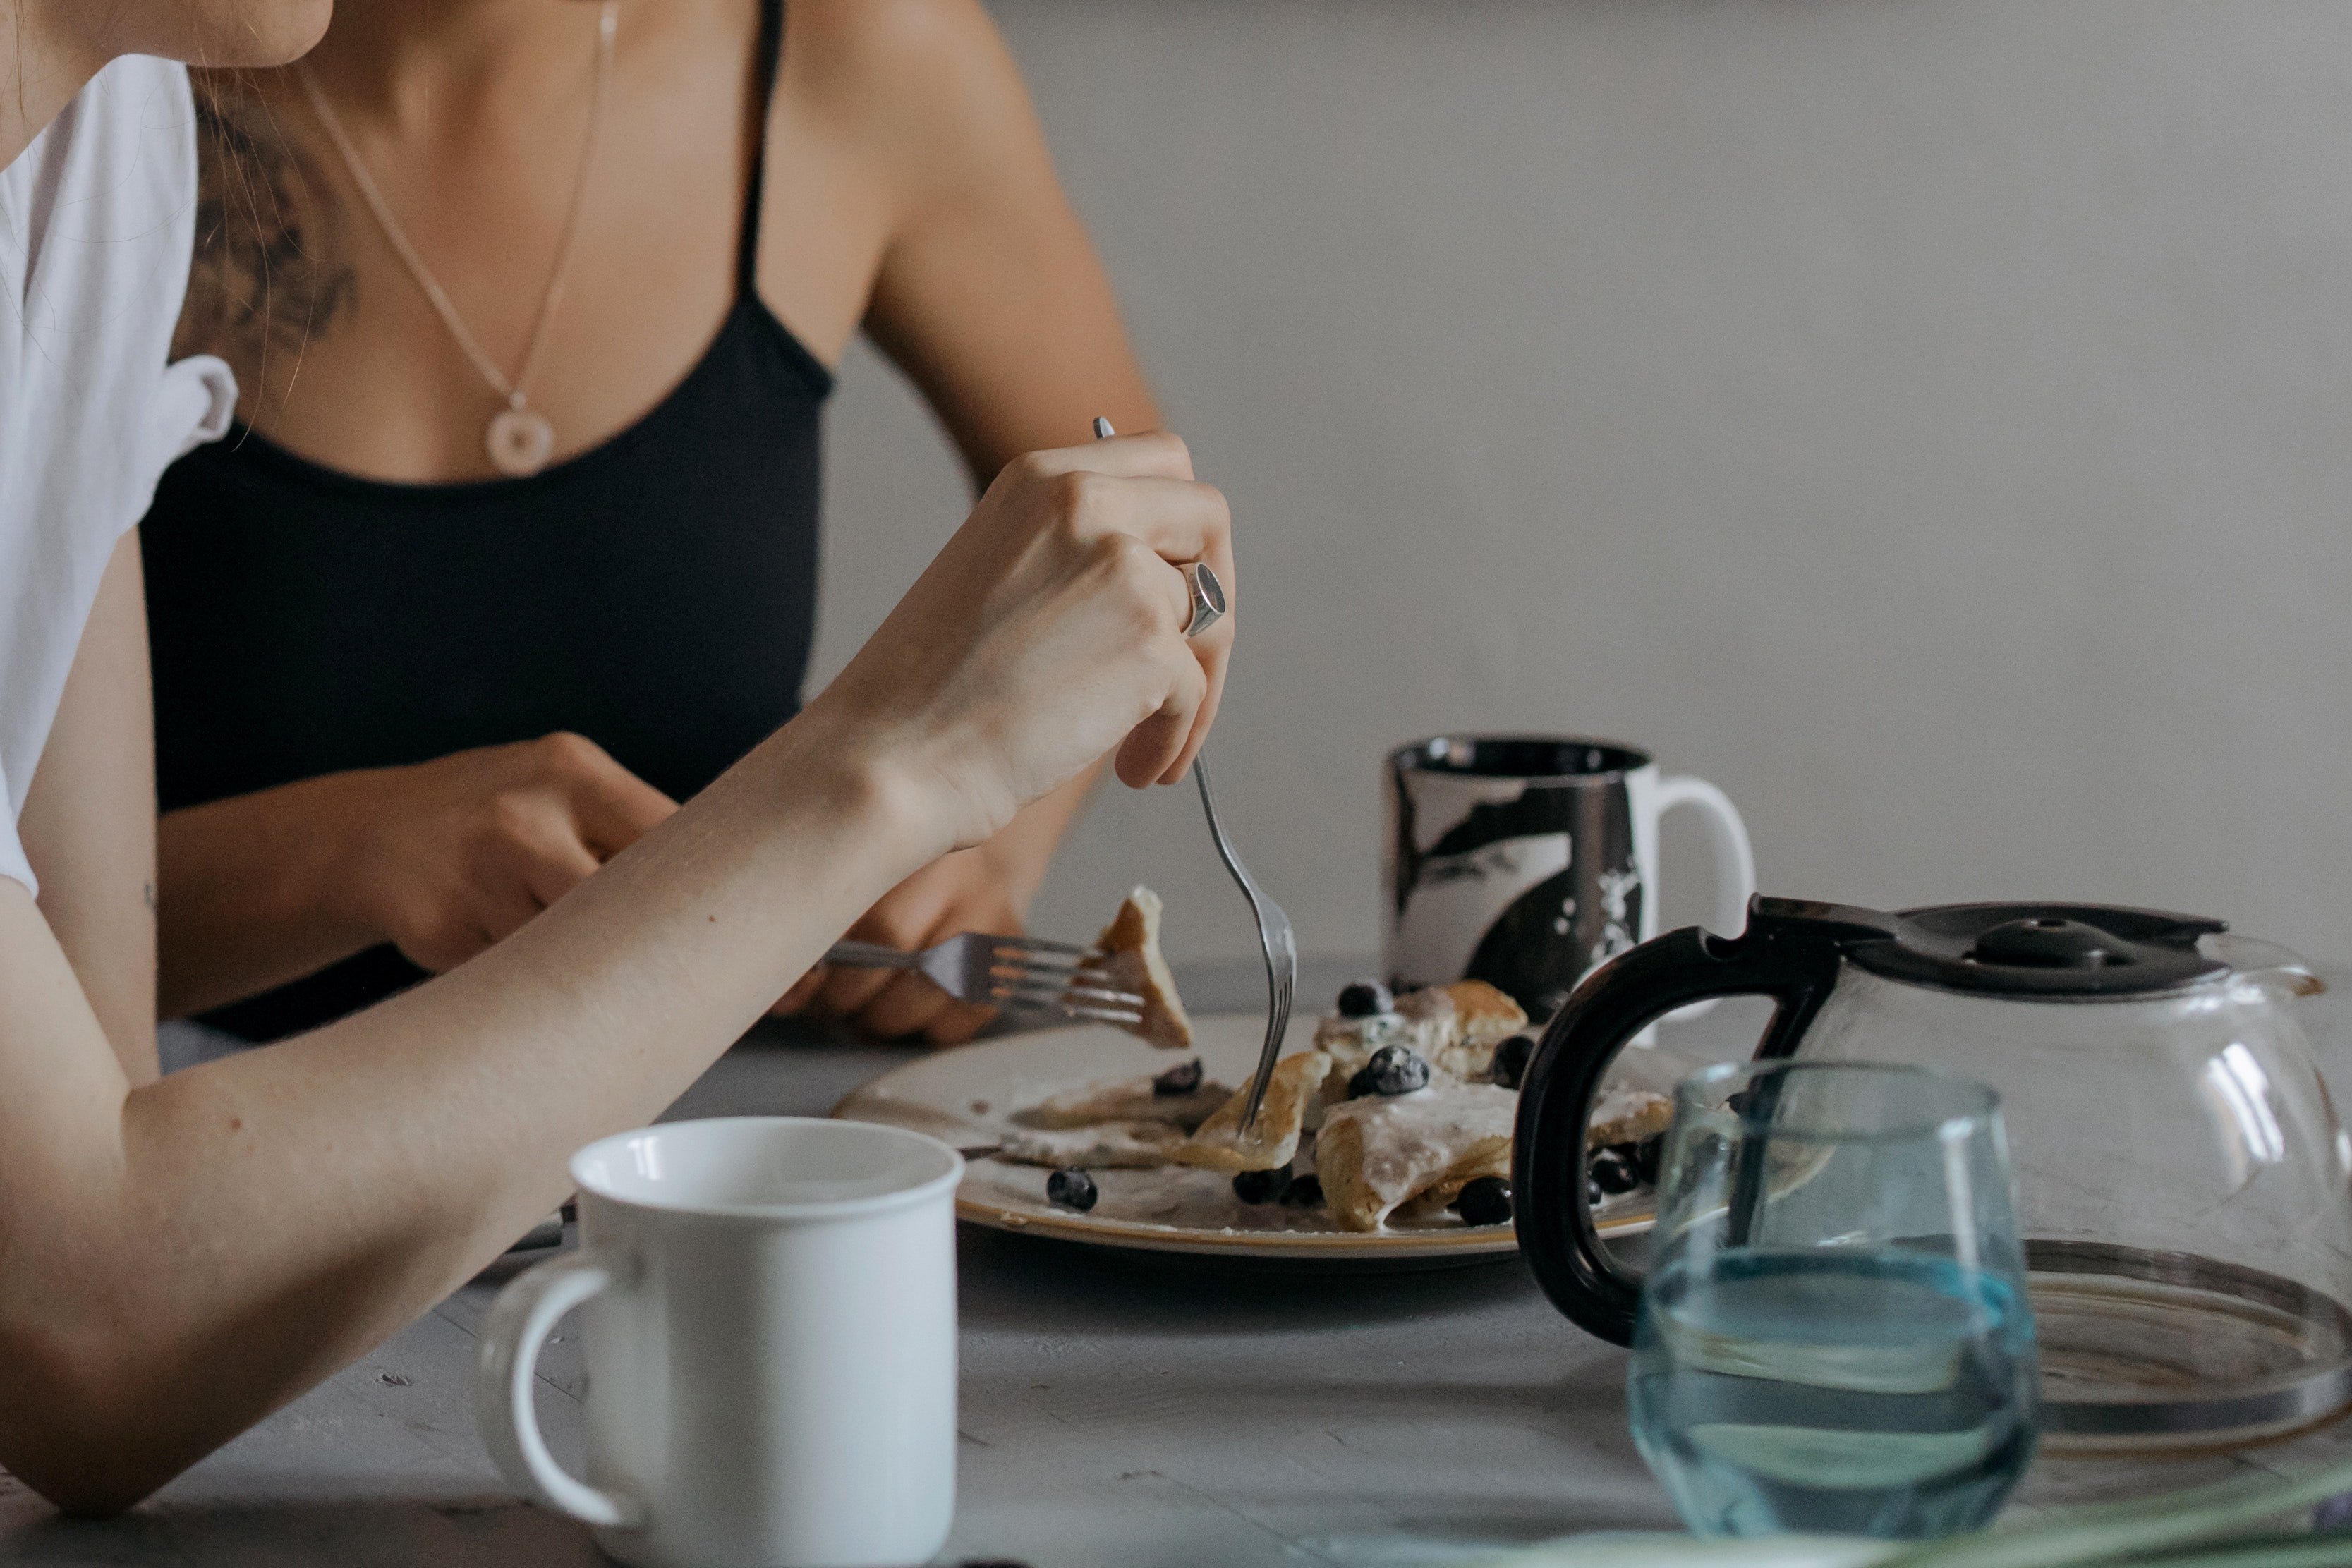 Amanda cooked breakfast for her family every day. | Source: Pexels